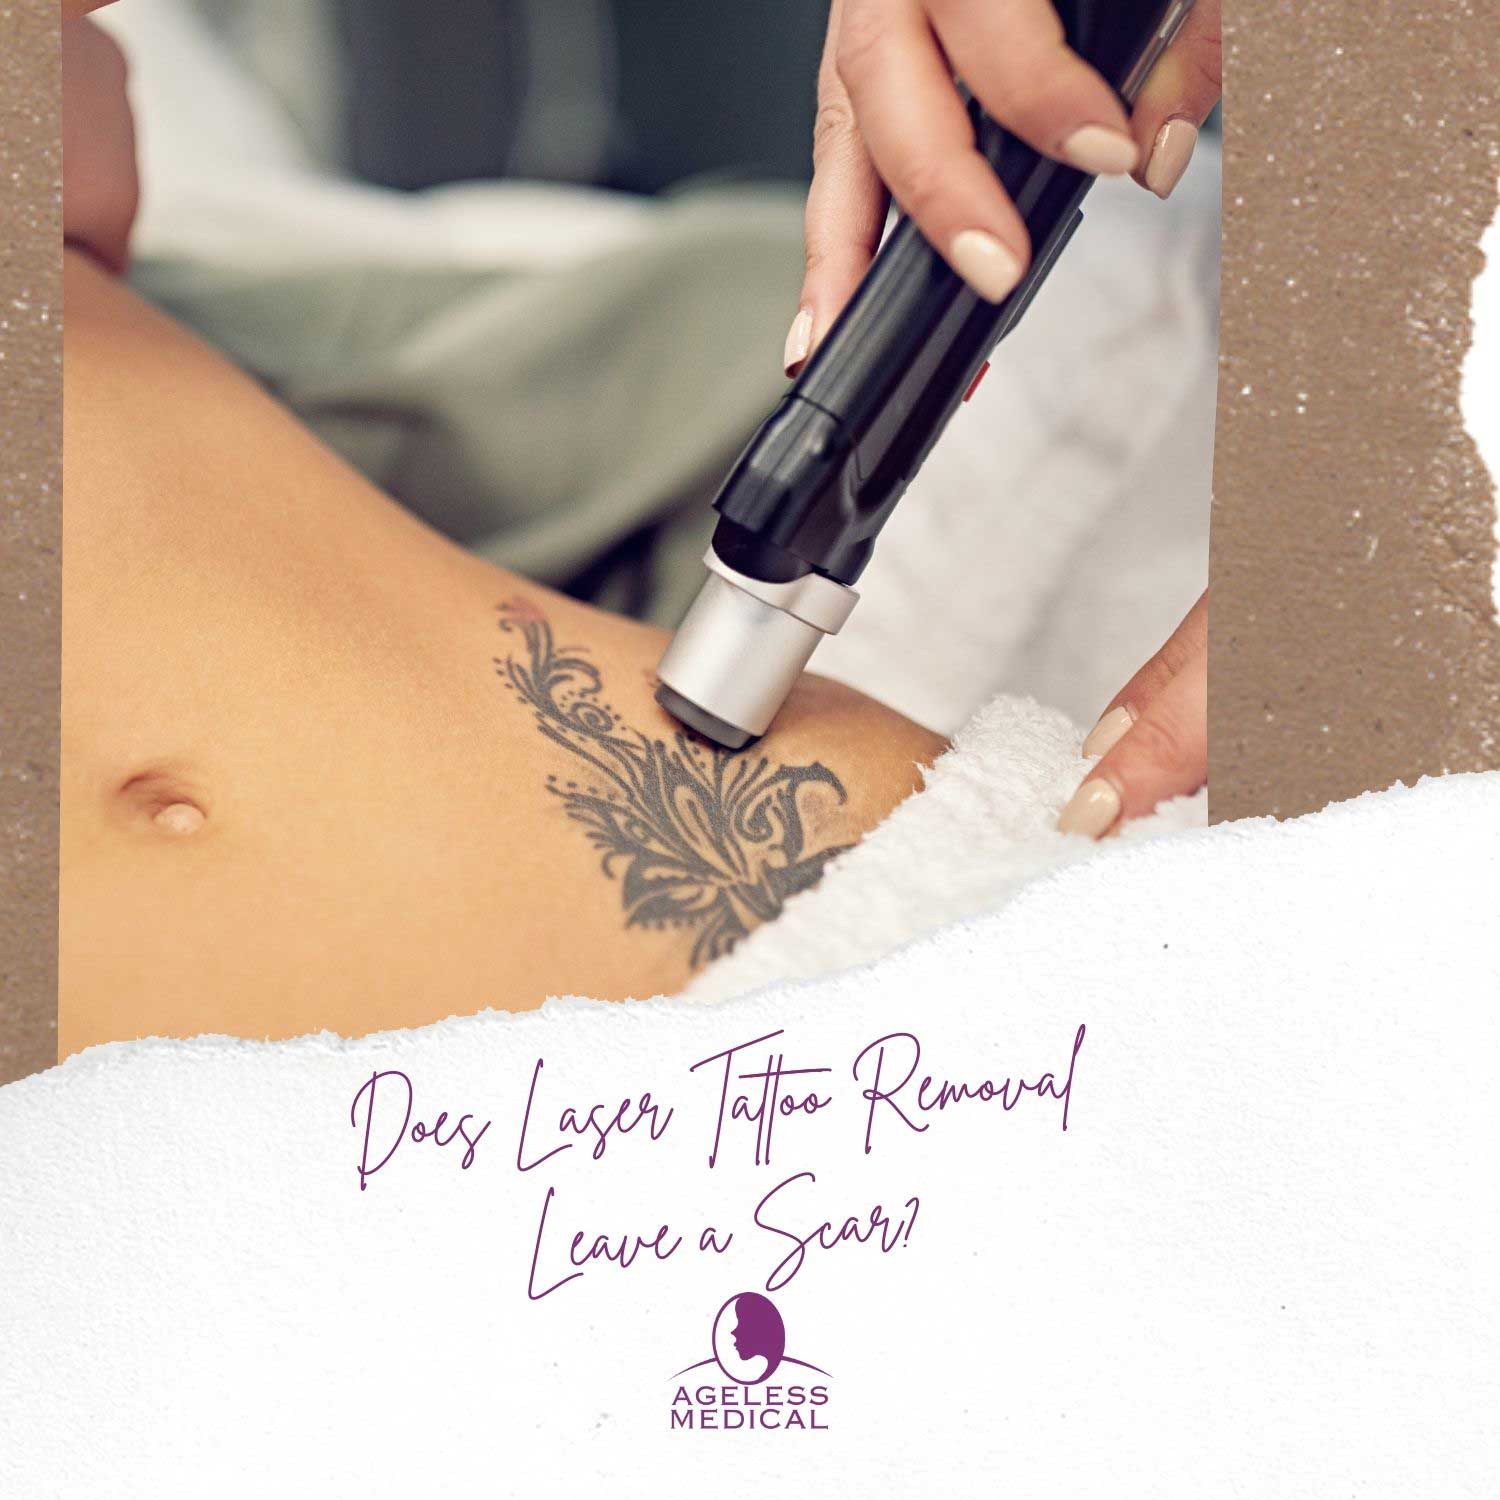 Does Laser Tattoo Removal Leave a Scar? | Ageless Medical